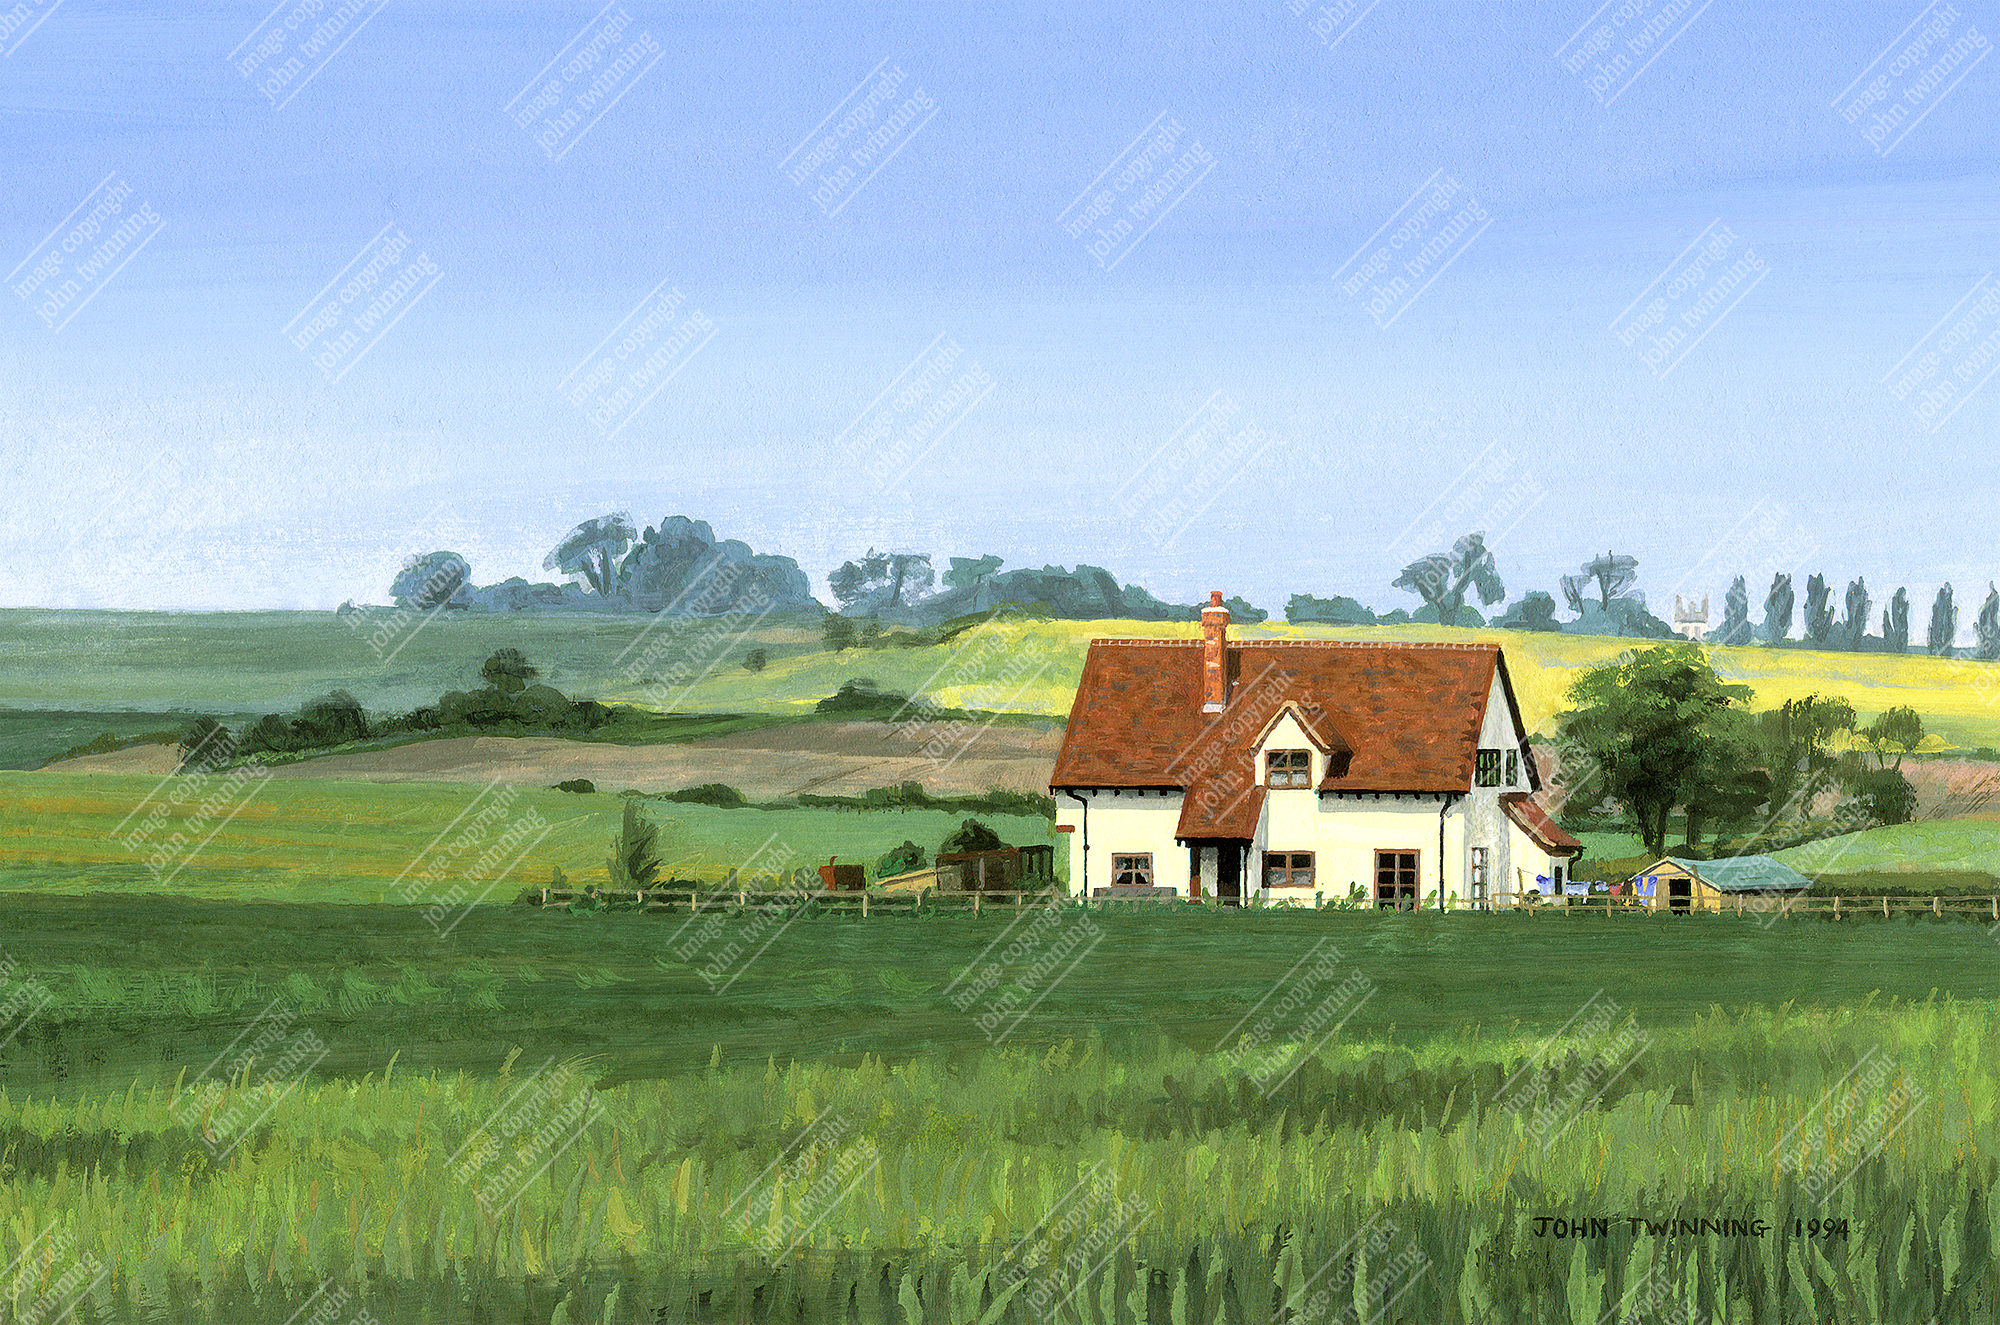 'Farmhouse Near Titchmarsh' - art print from a painting of a northamptonshire agricultural landscape with rolling fields